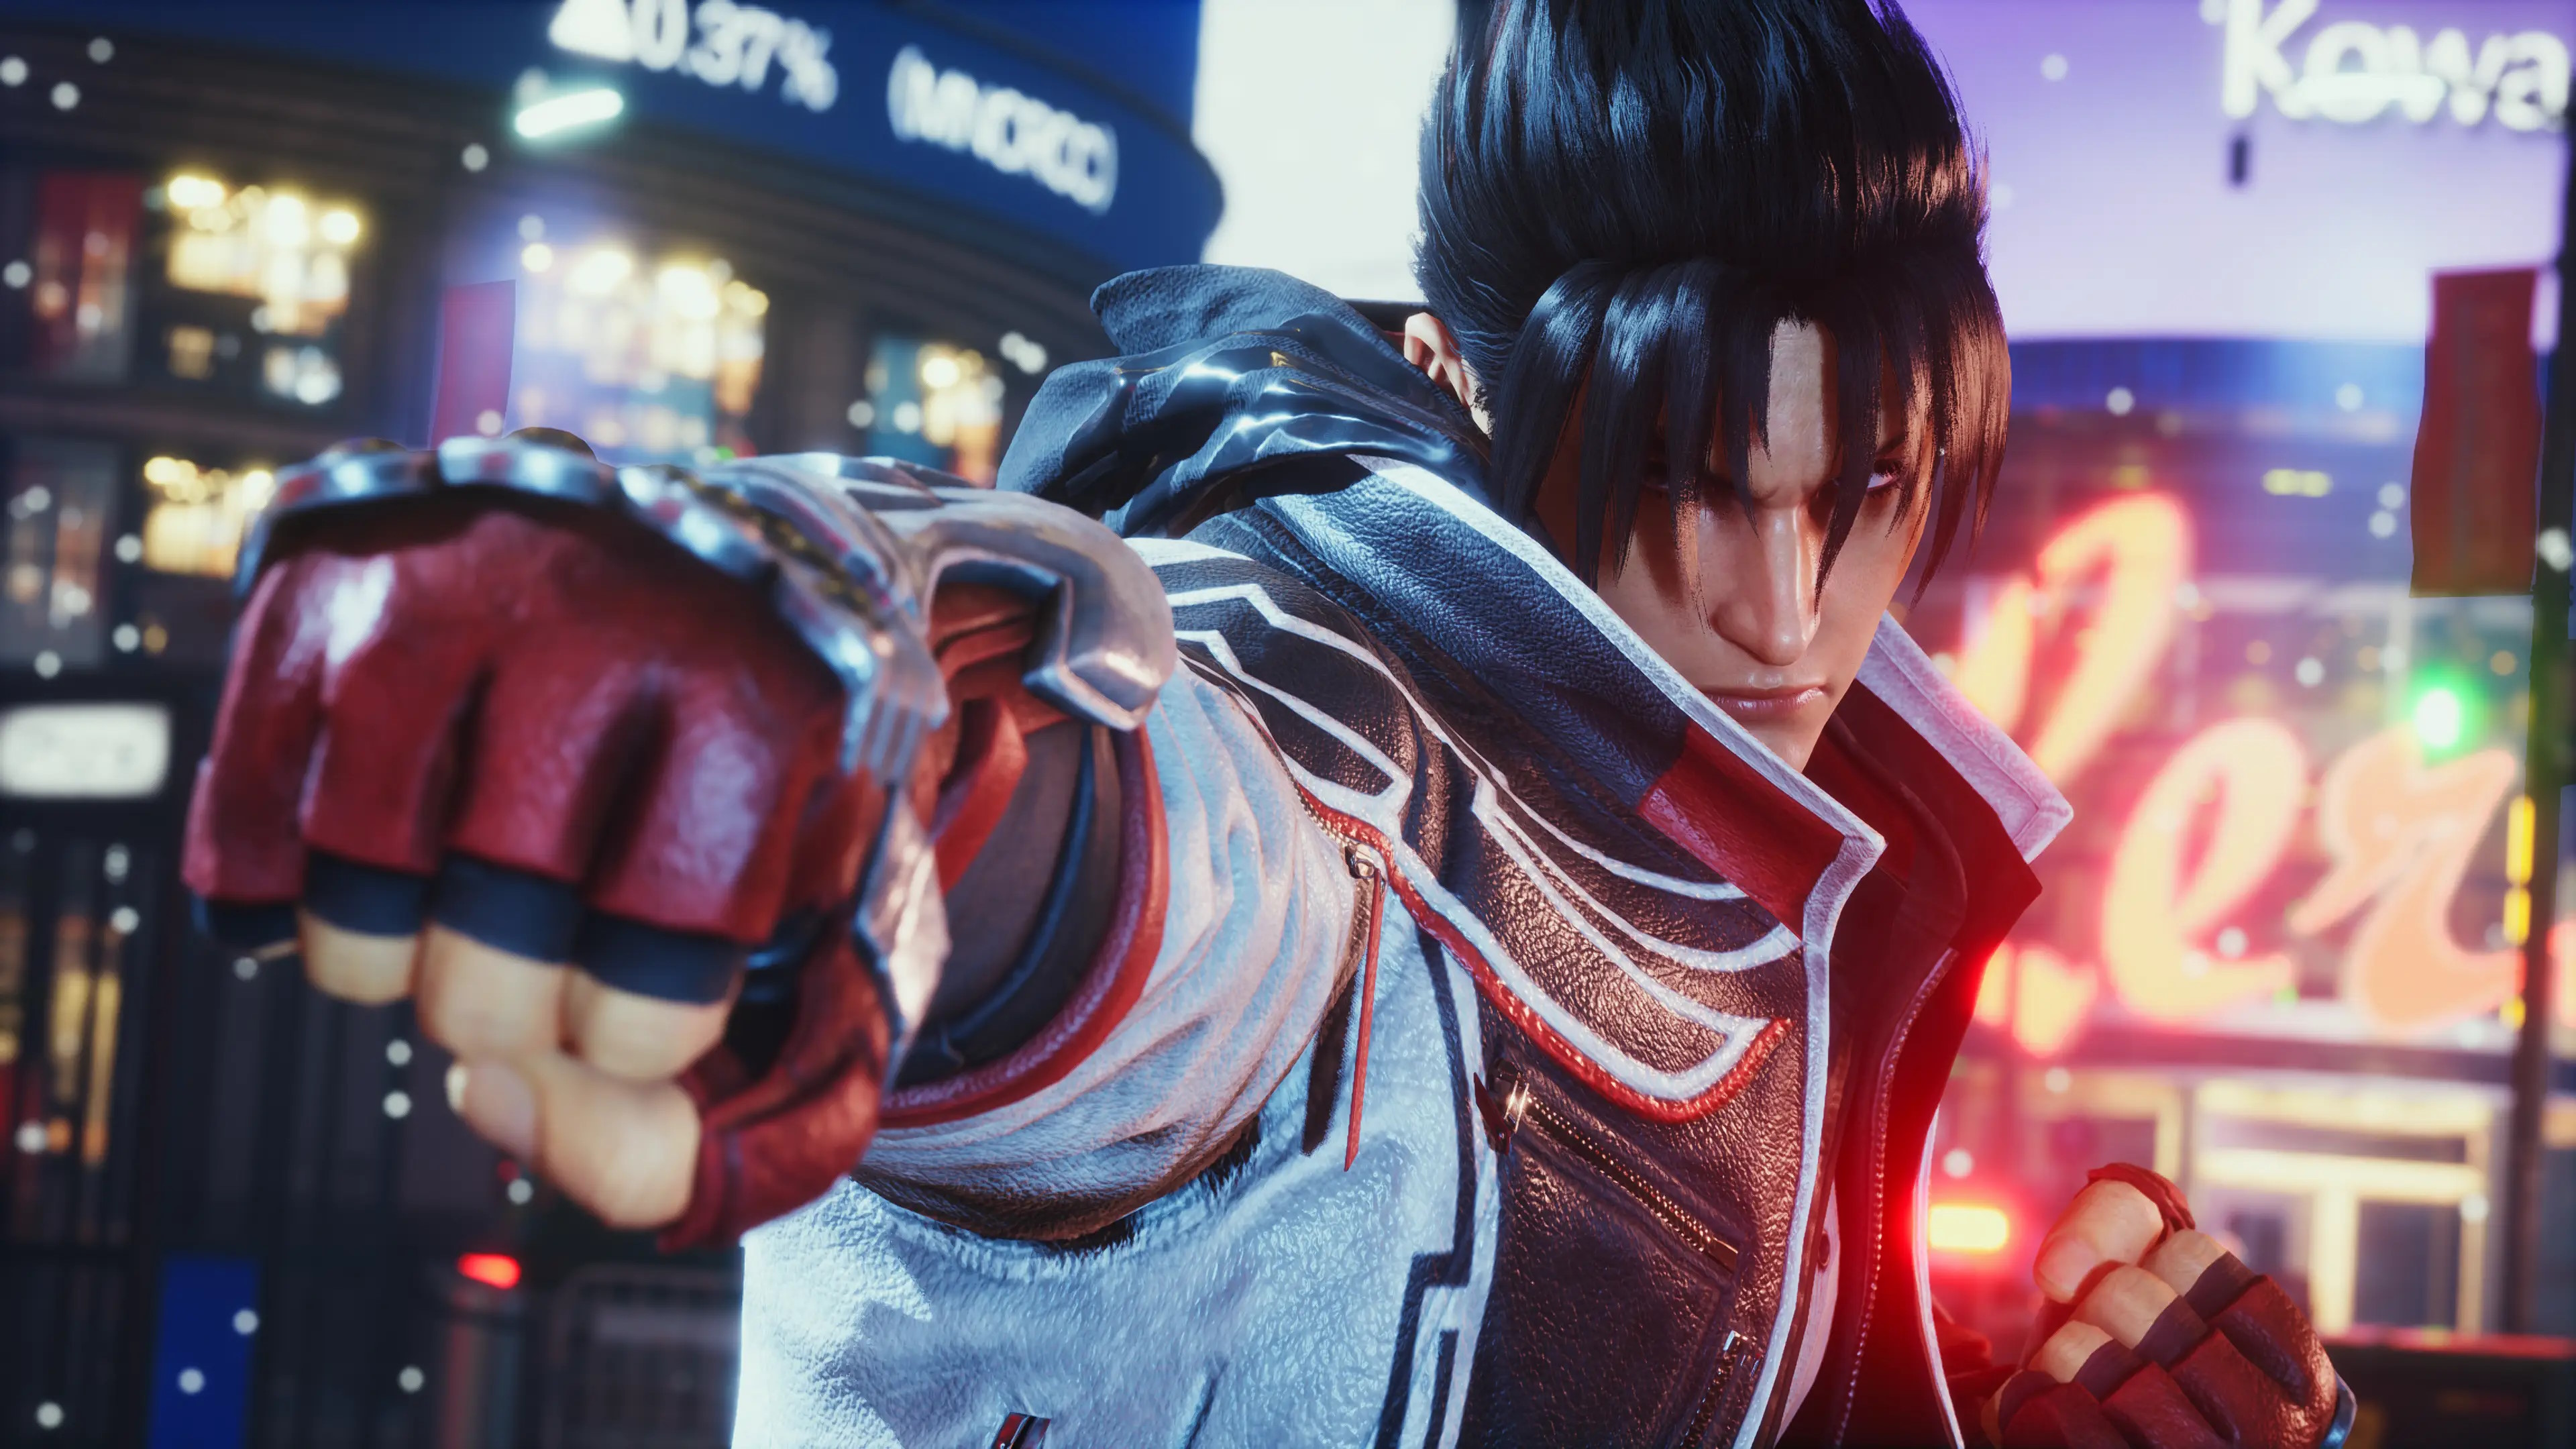 Tekken 8 fans can get early access to the closed beta if they're a